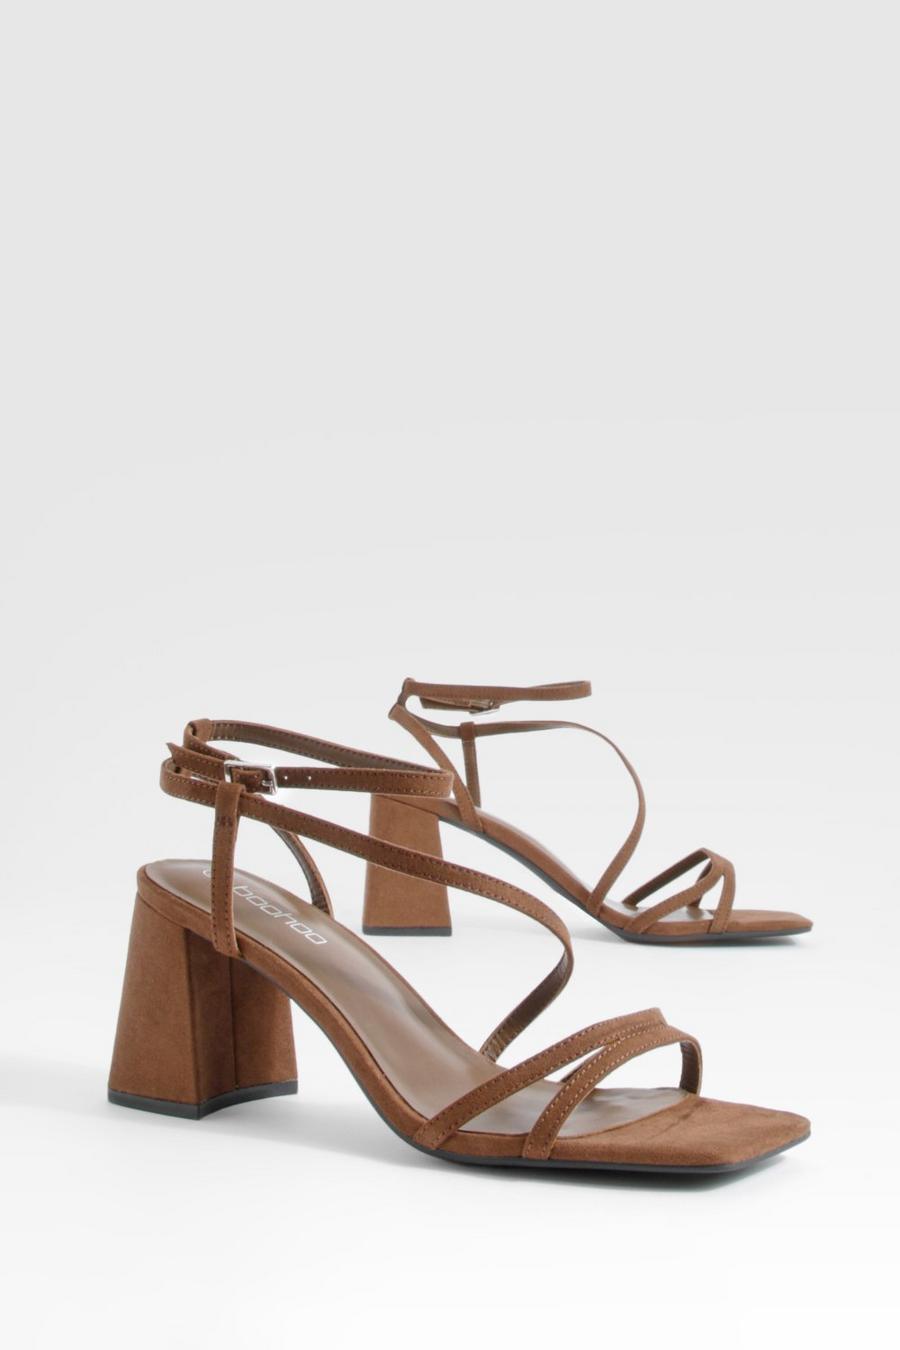 Chocolate Double Strap Mid Heel Strappy Sandals 